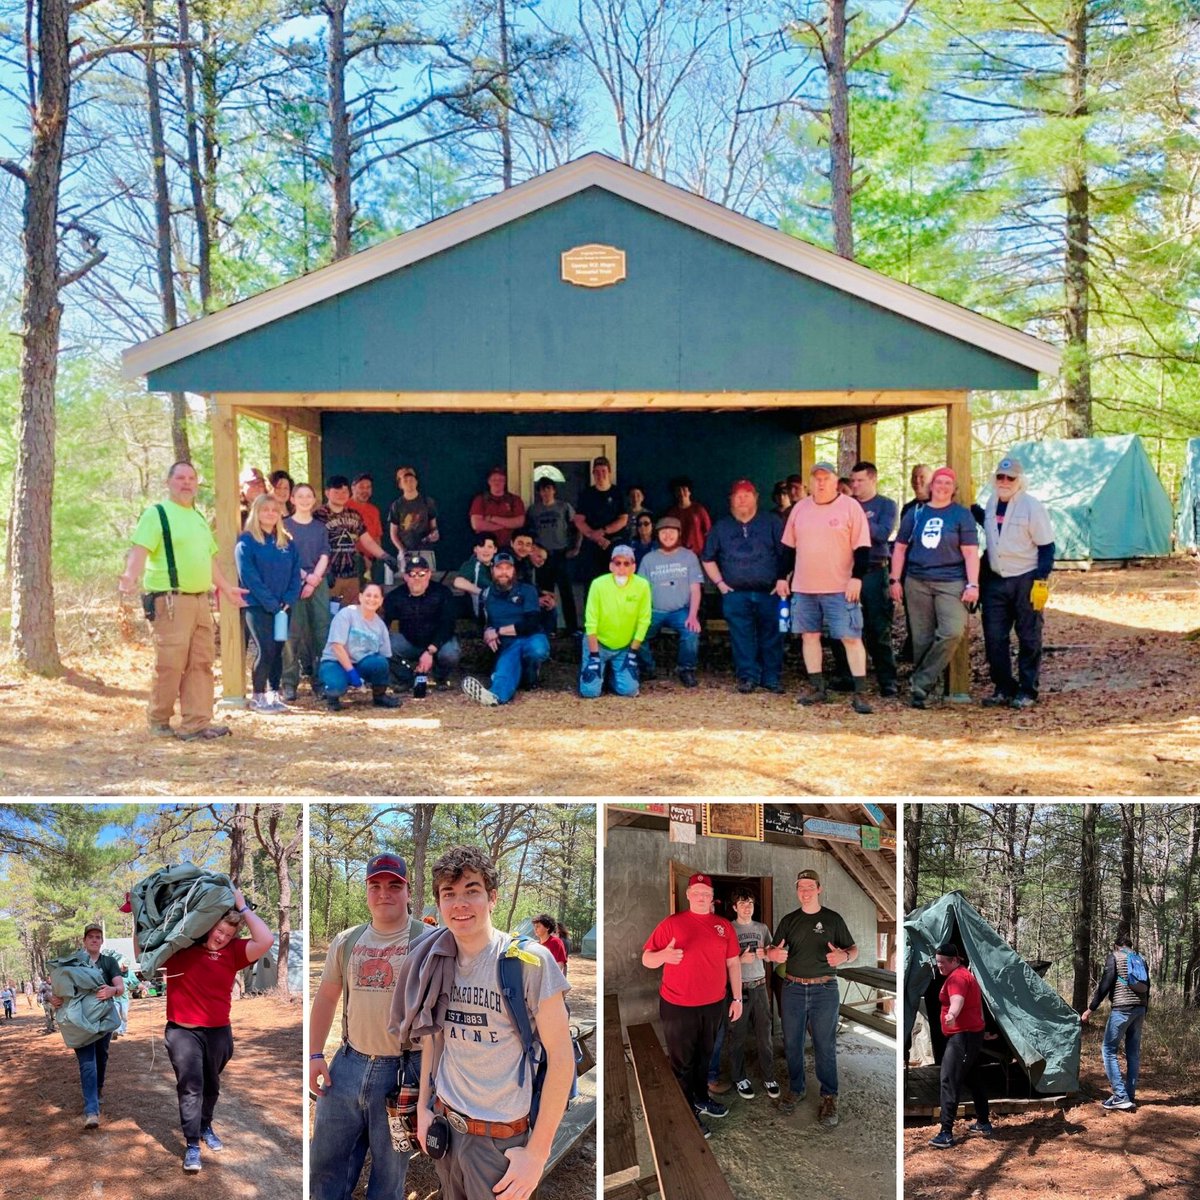 #CampIsCallingAnswerTheCall!
Last Saturday, nearly 40 people representing many Units were on hand in #PlymouthMA for #CampSquanto Appreciation Day. Attendees pitched in (in some cases, literally, putting up tents) doing various cleanup tasks throughout the @CampSquanto grounds.